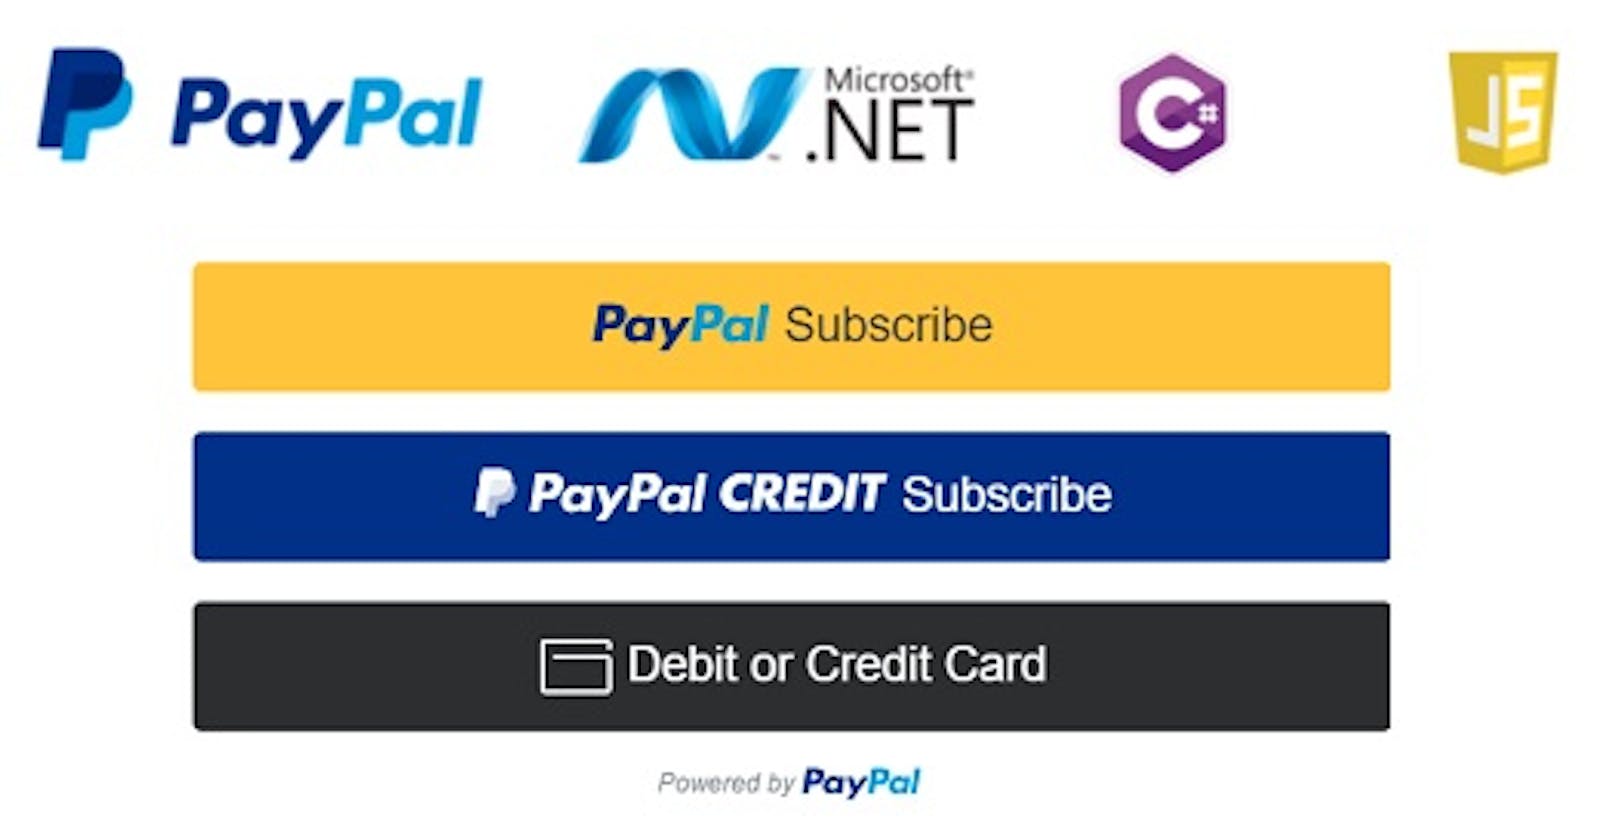 Accept Subscriptions/Recurring payments with PayPal in ASP.NET & C#